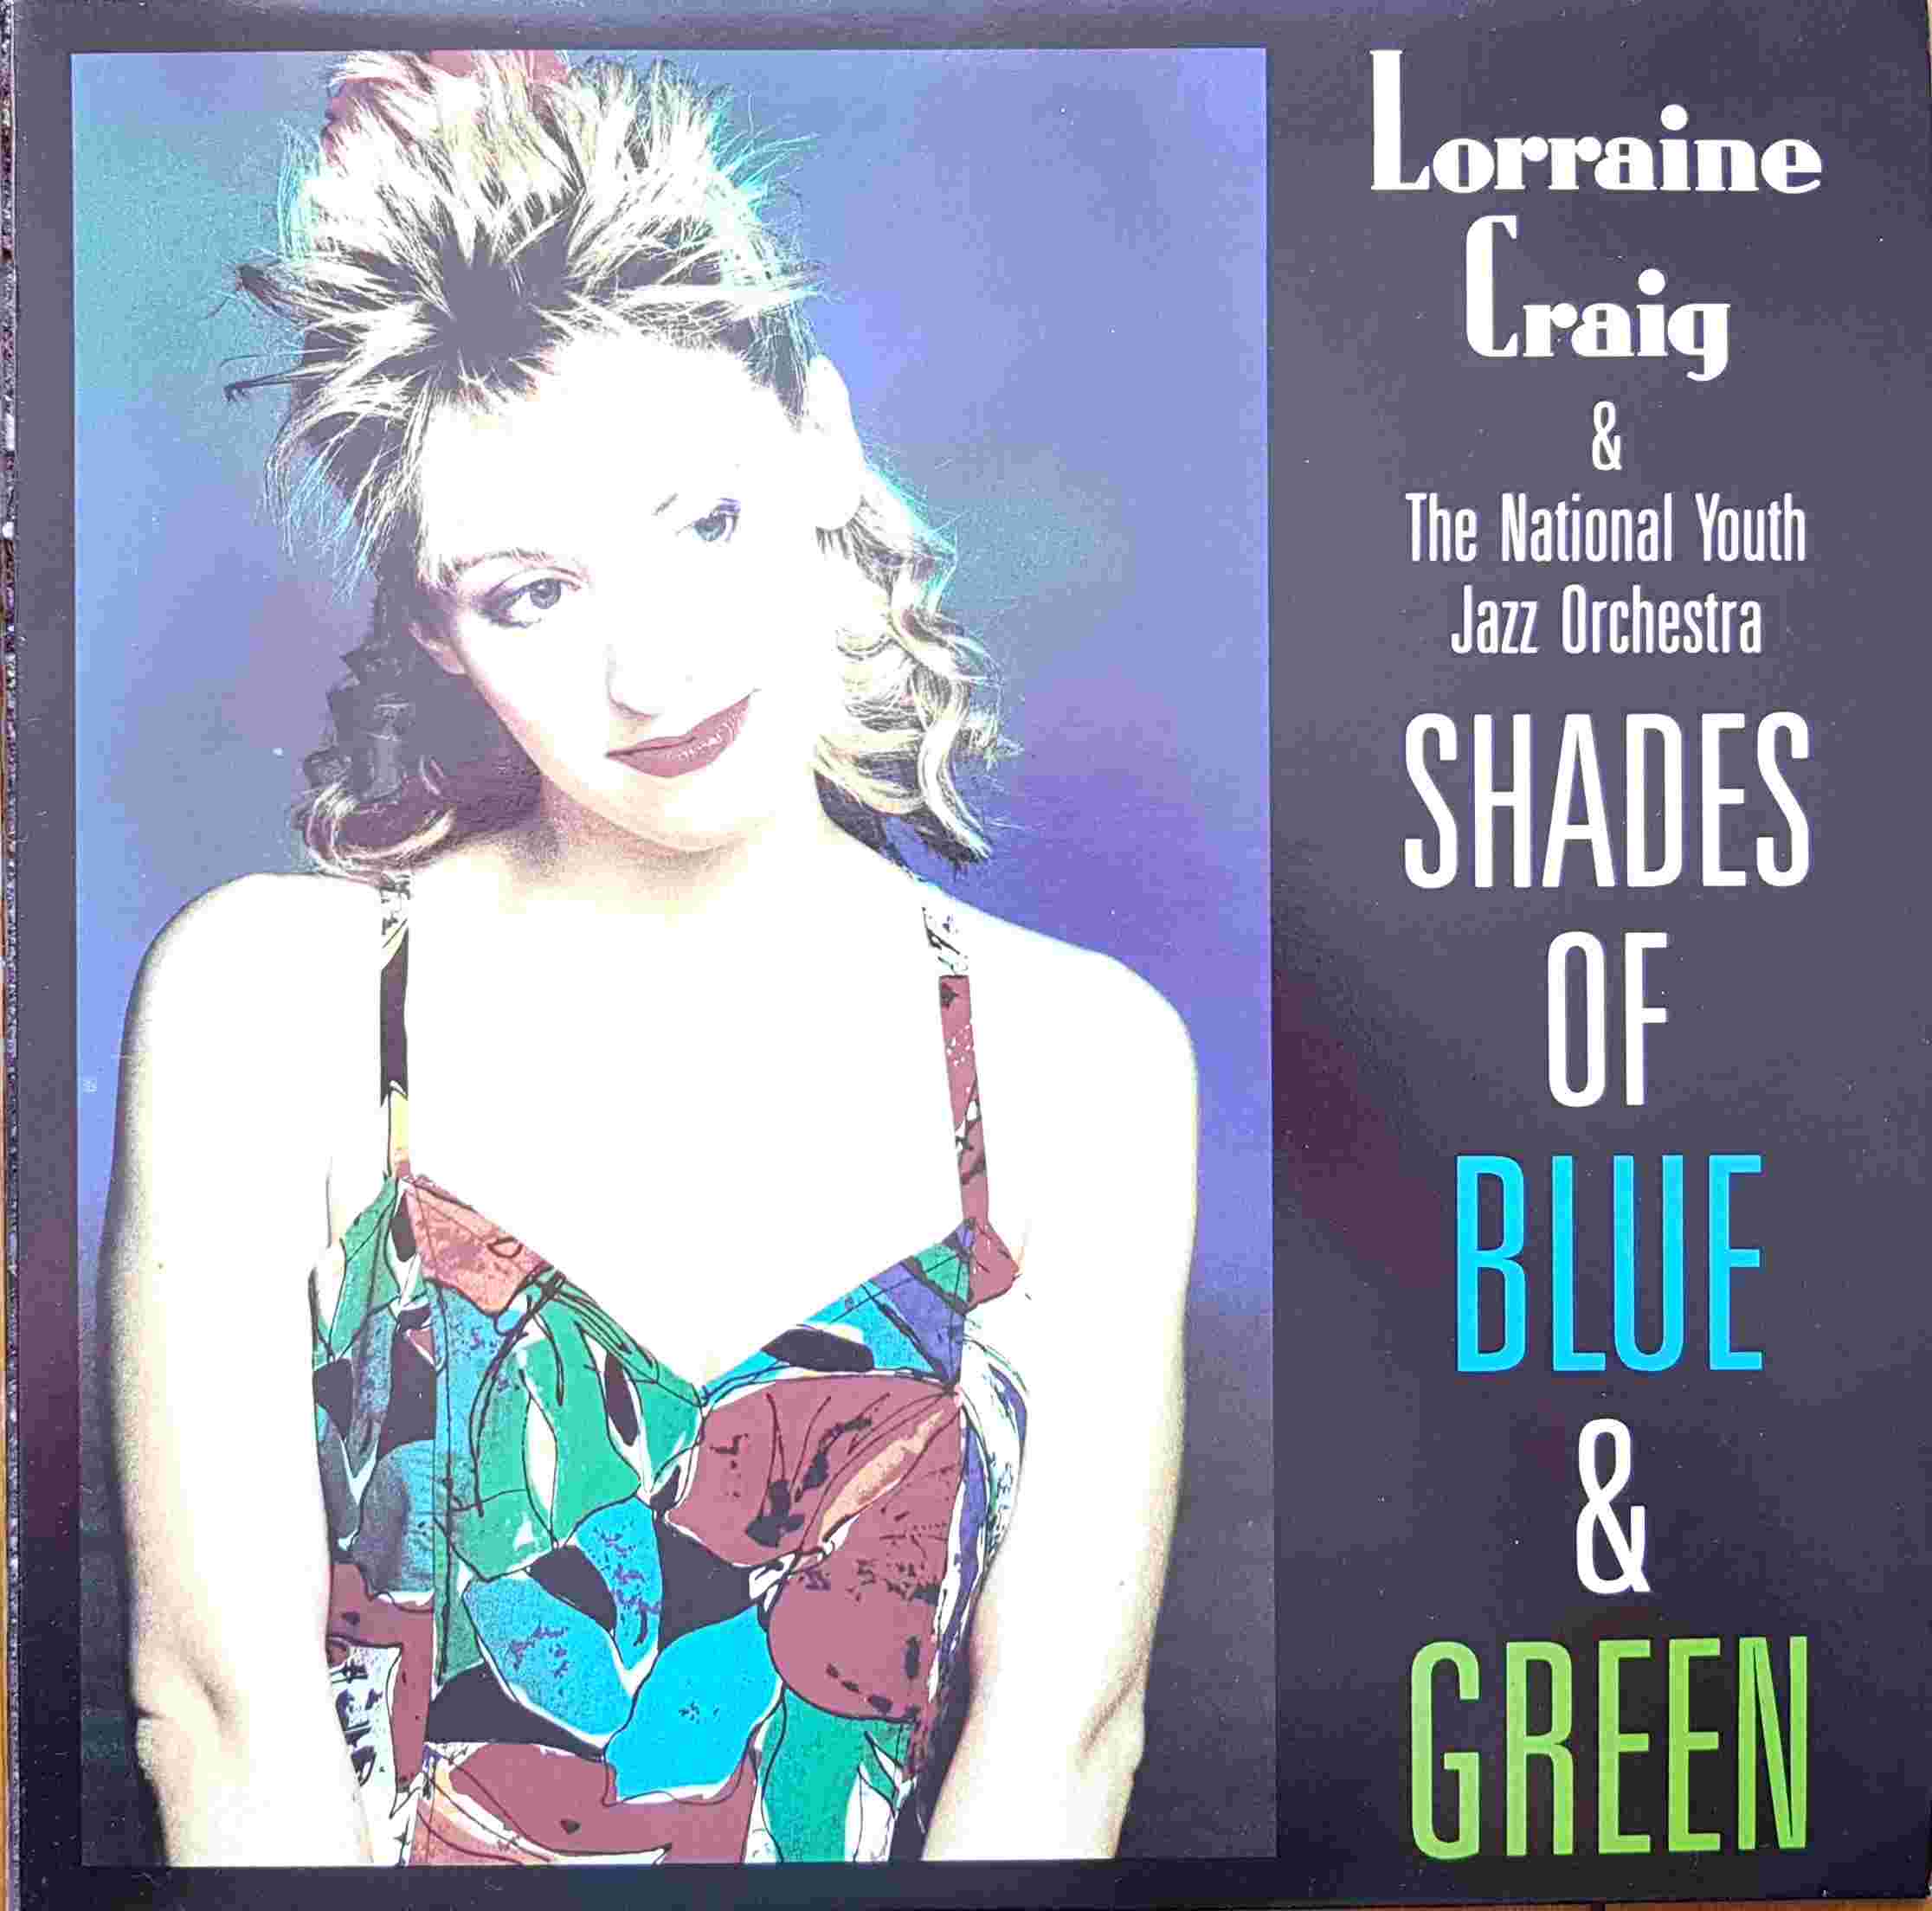 Picture of REN 702 Shades of blue and green by artist Various from the BBC albums - Records and Tapes library